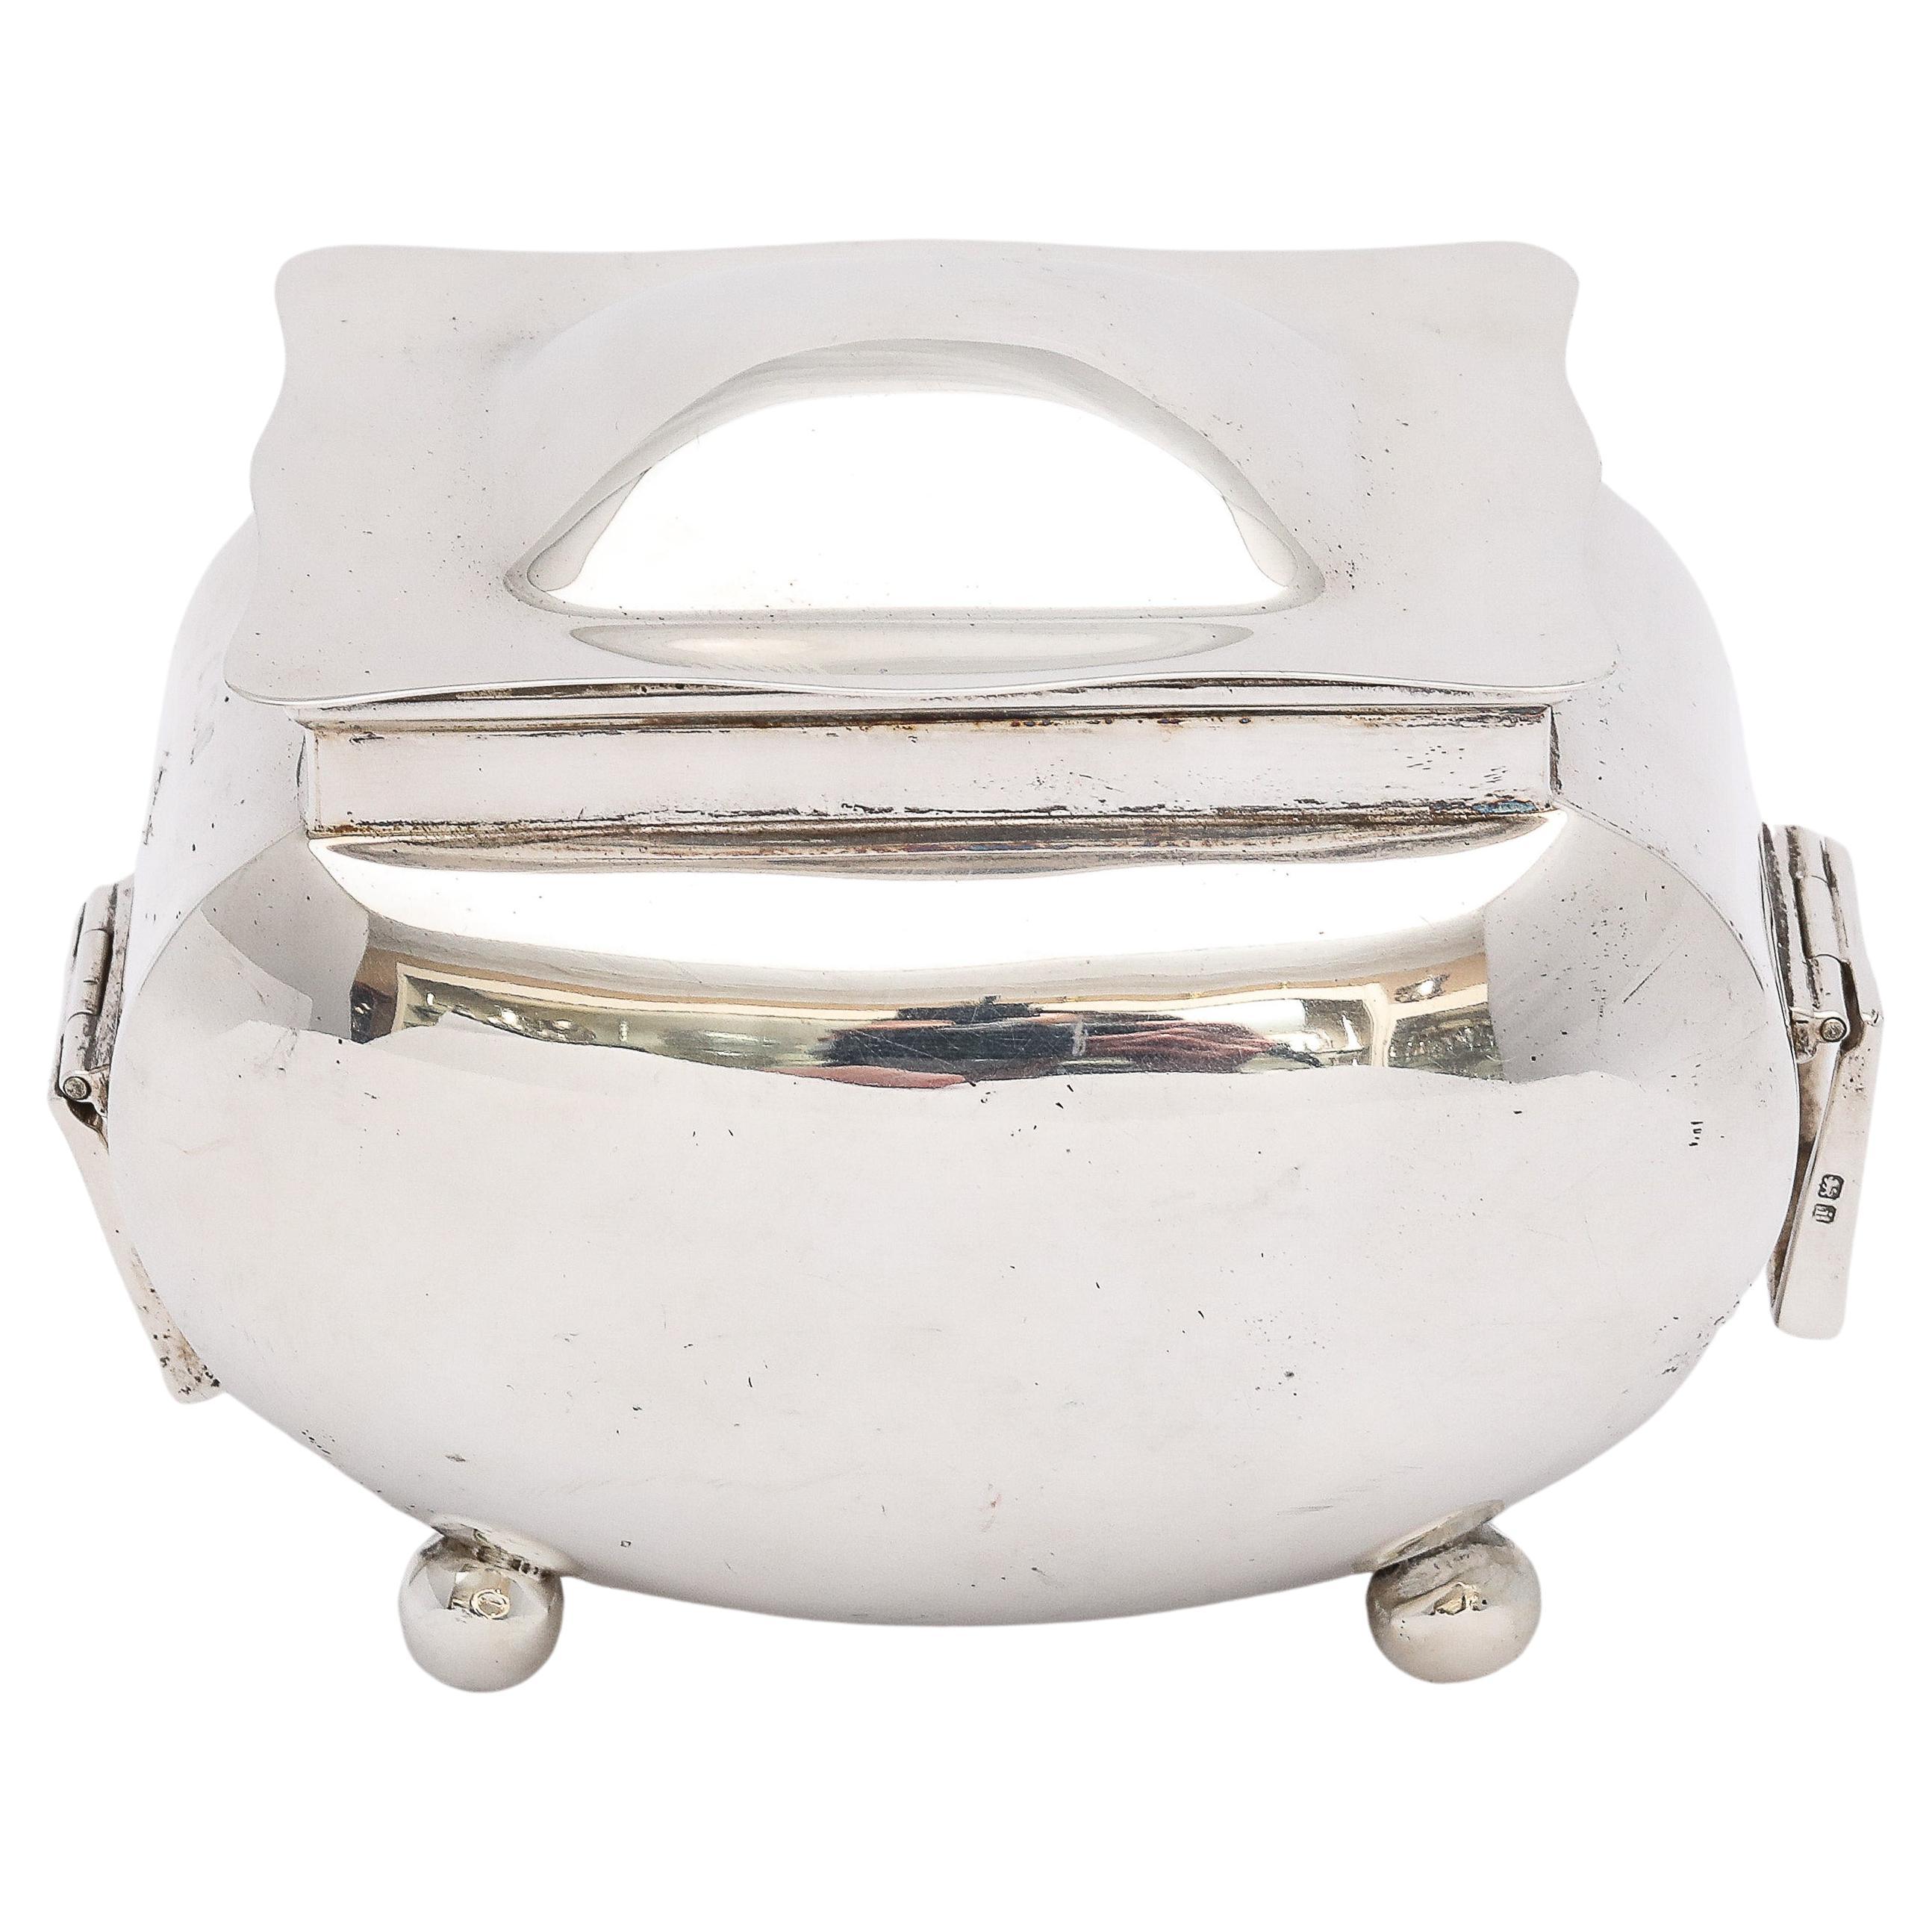 Edwardian Period Sterling Silver Ball-Footed Tea Caddy With HInged Lid For Sale